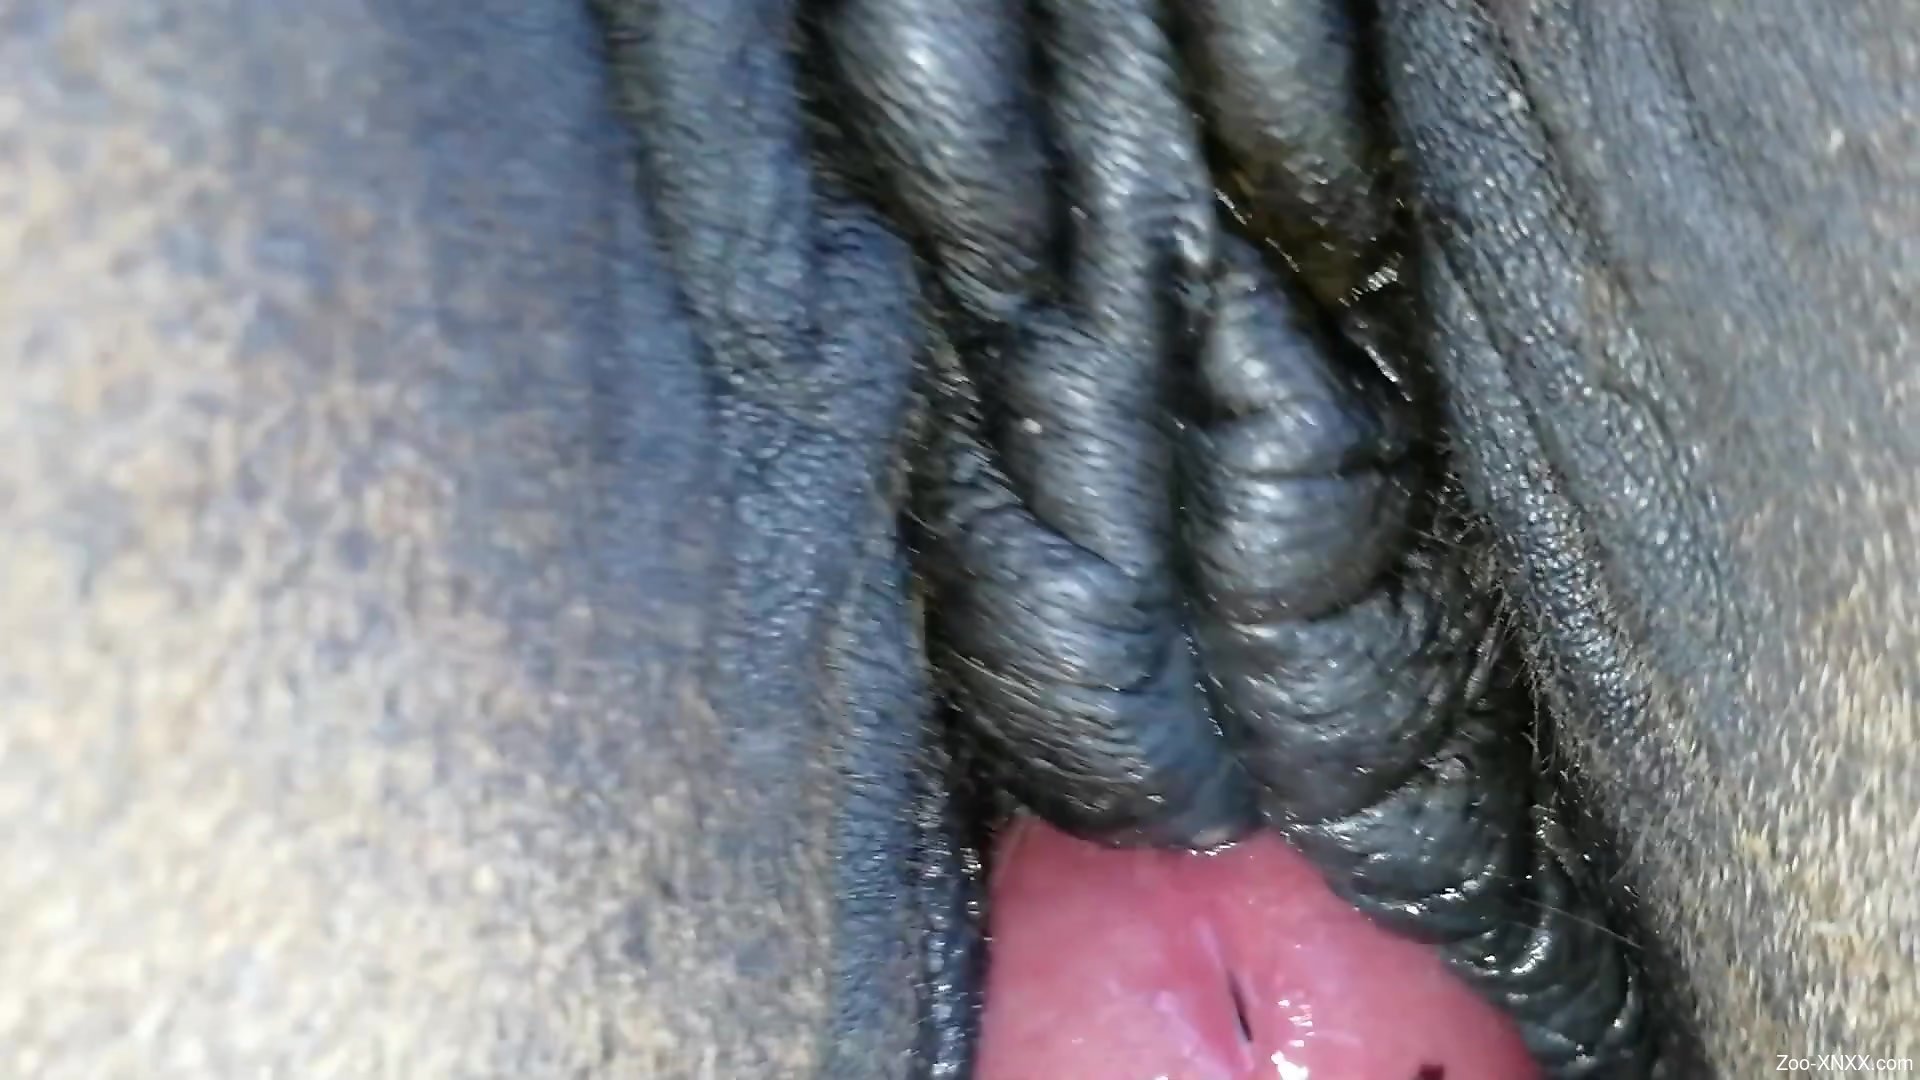 Male cums in mare pussy